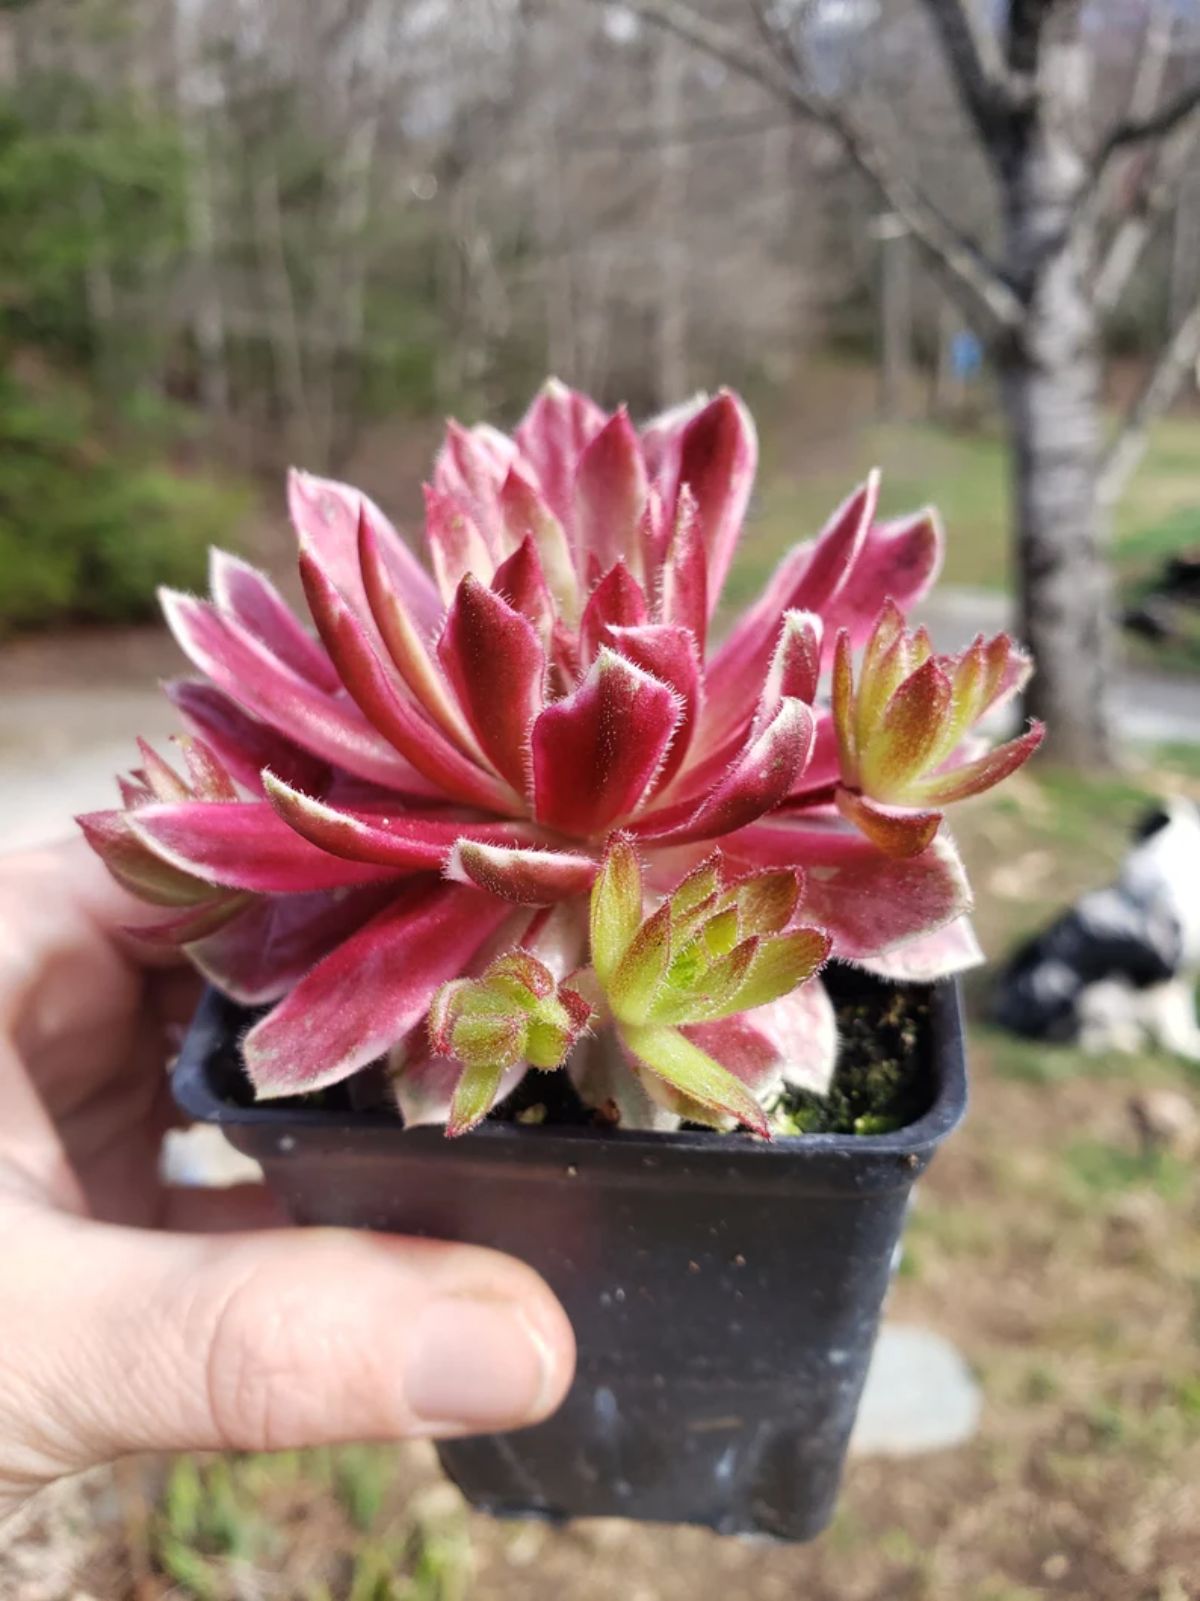 Sempervivum Lotus Blossom grows in a plastic pot held by hand.